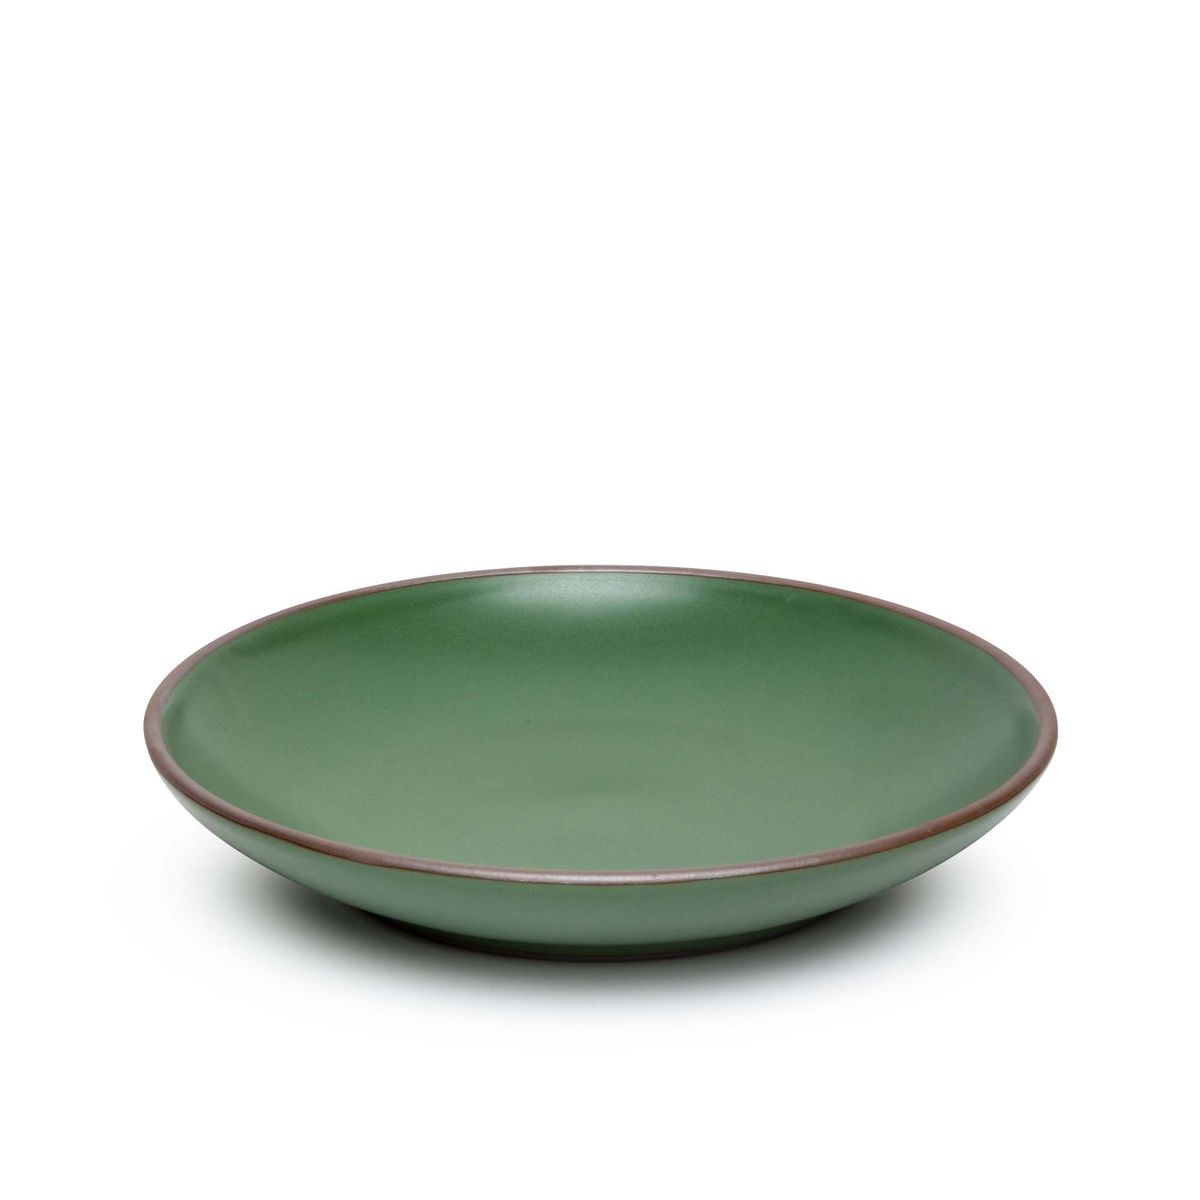 A large ceramic plate with a curved bowl edge in a deep, verdant green color featuring iron speckles and an unglazed rim.